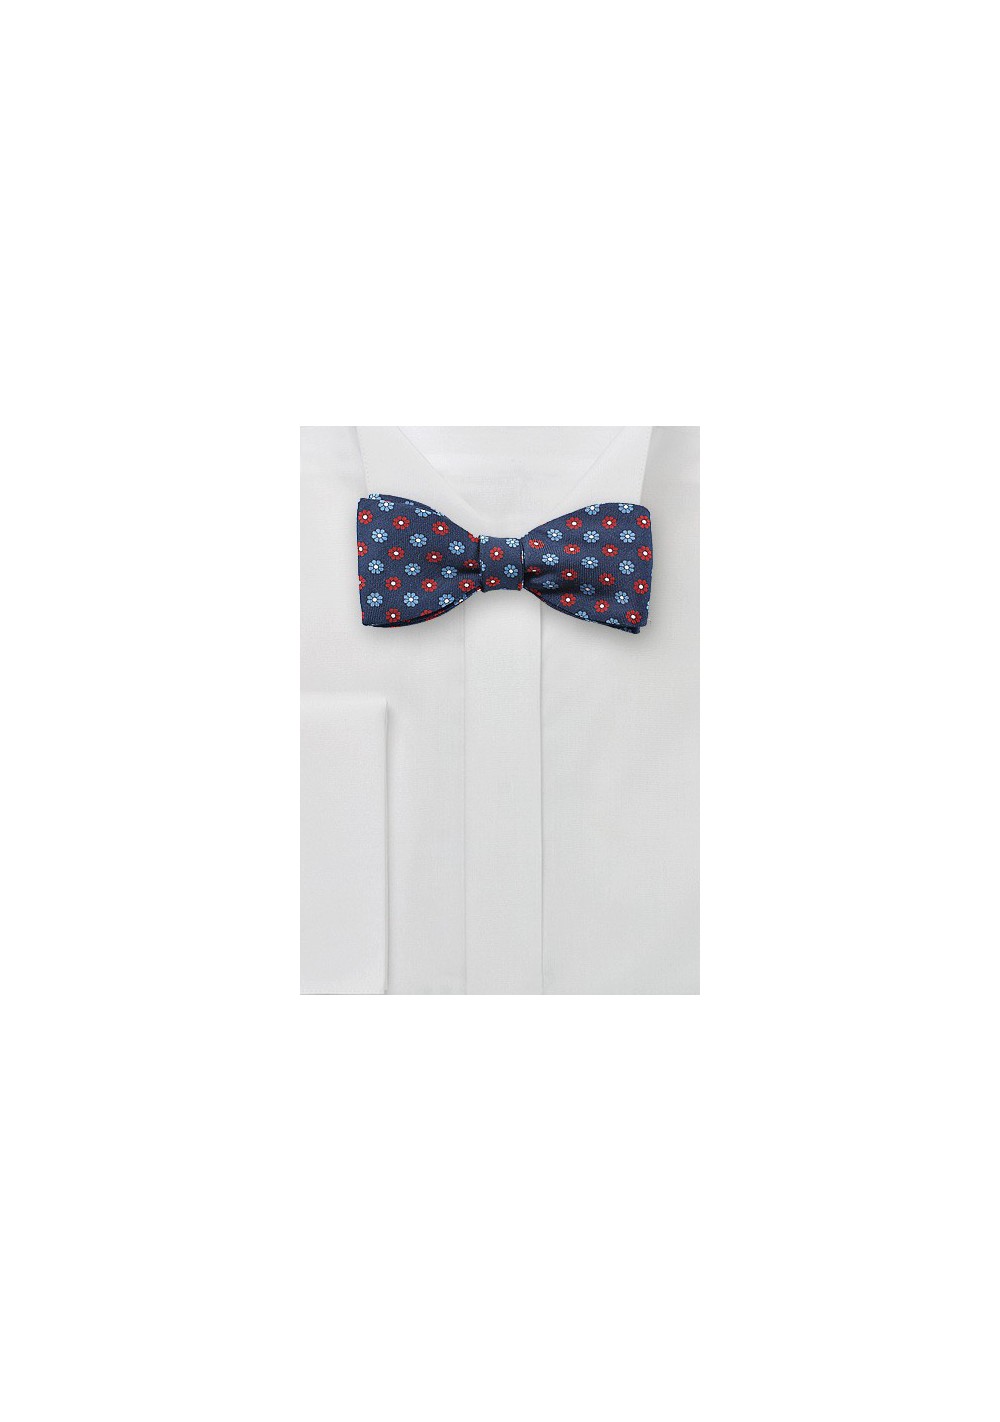 Summer Flower Print Bow Tie in Navy and Red